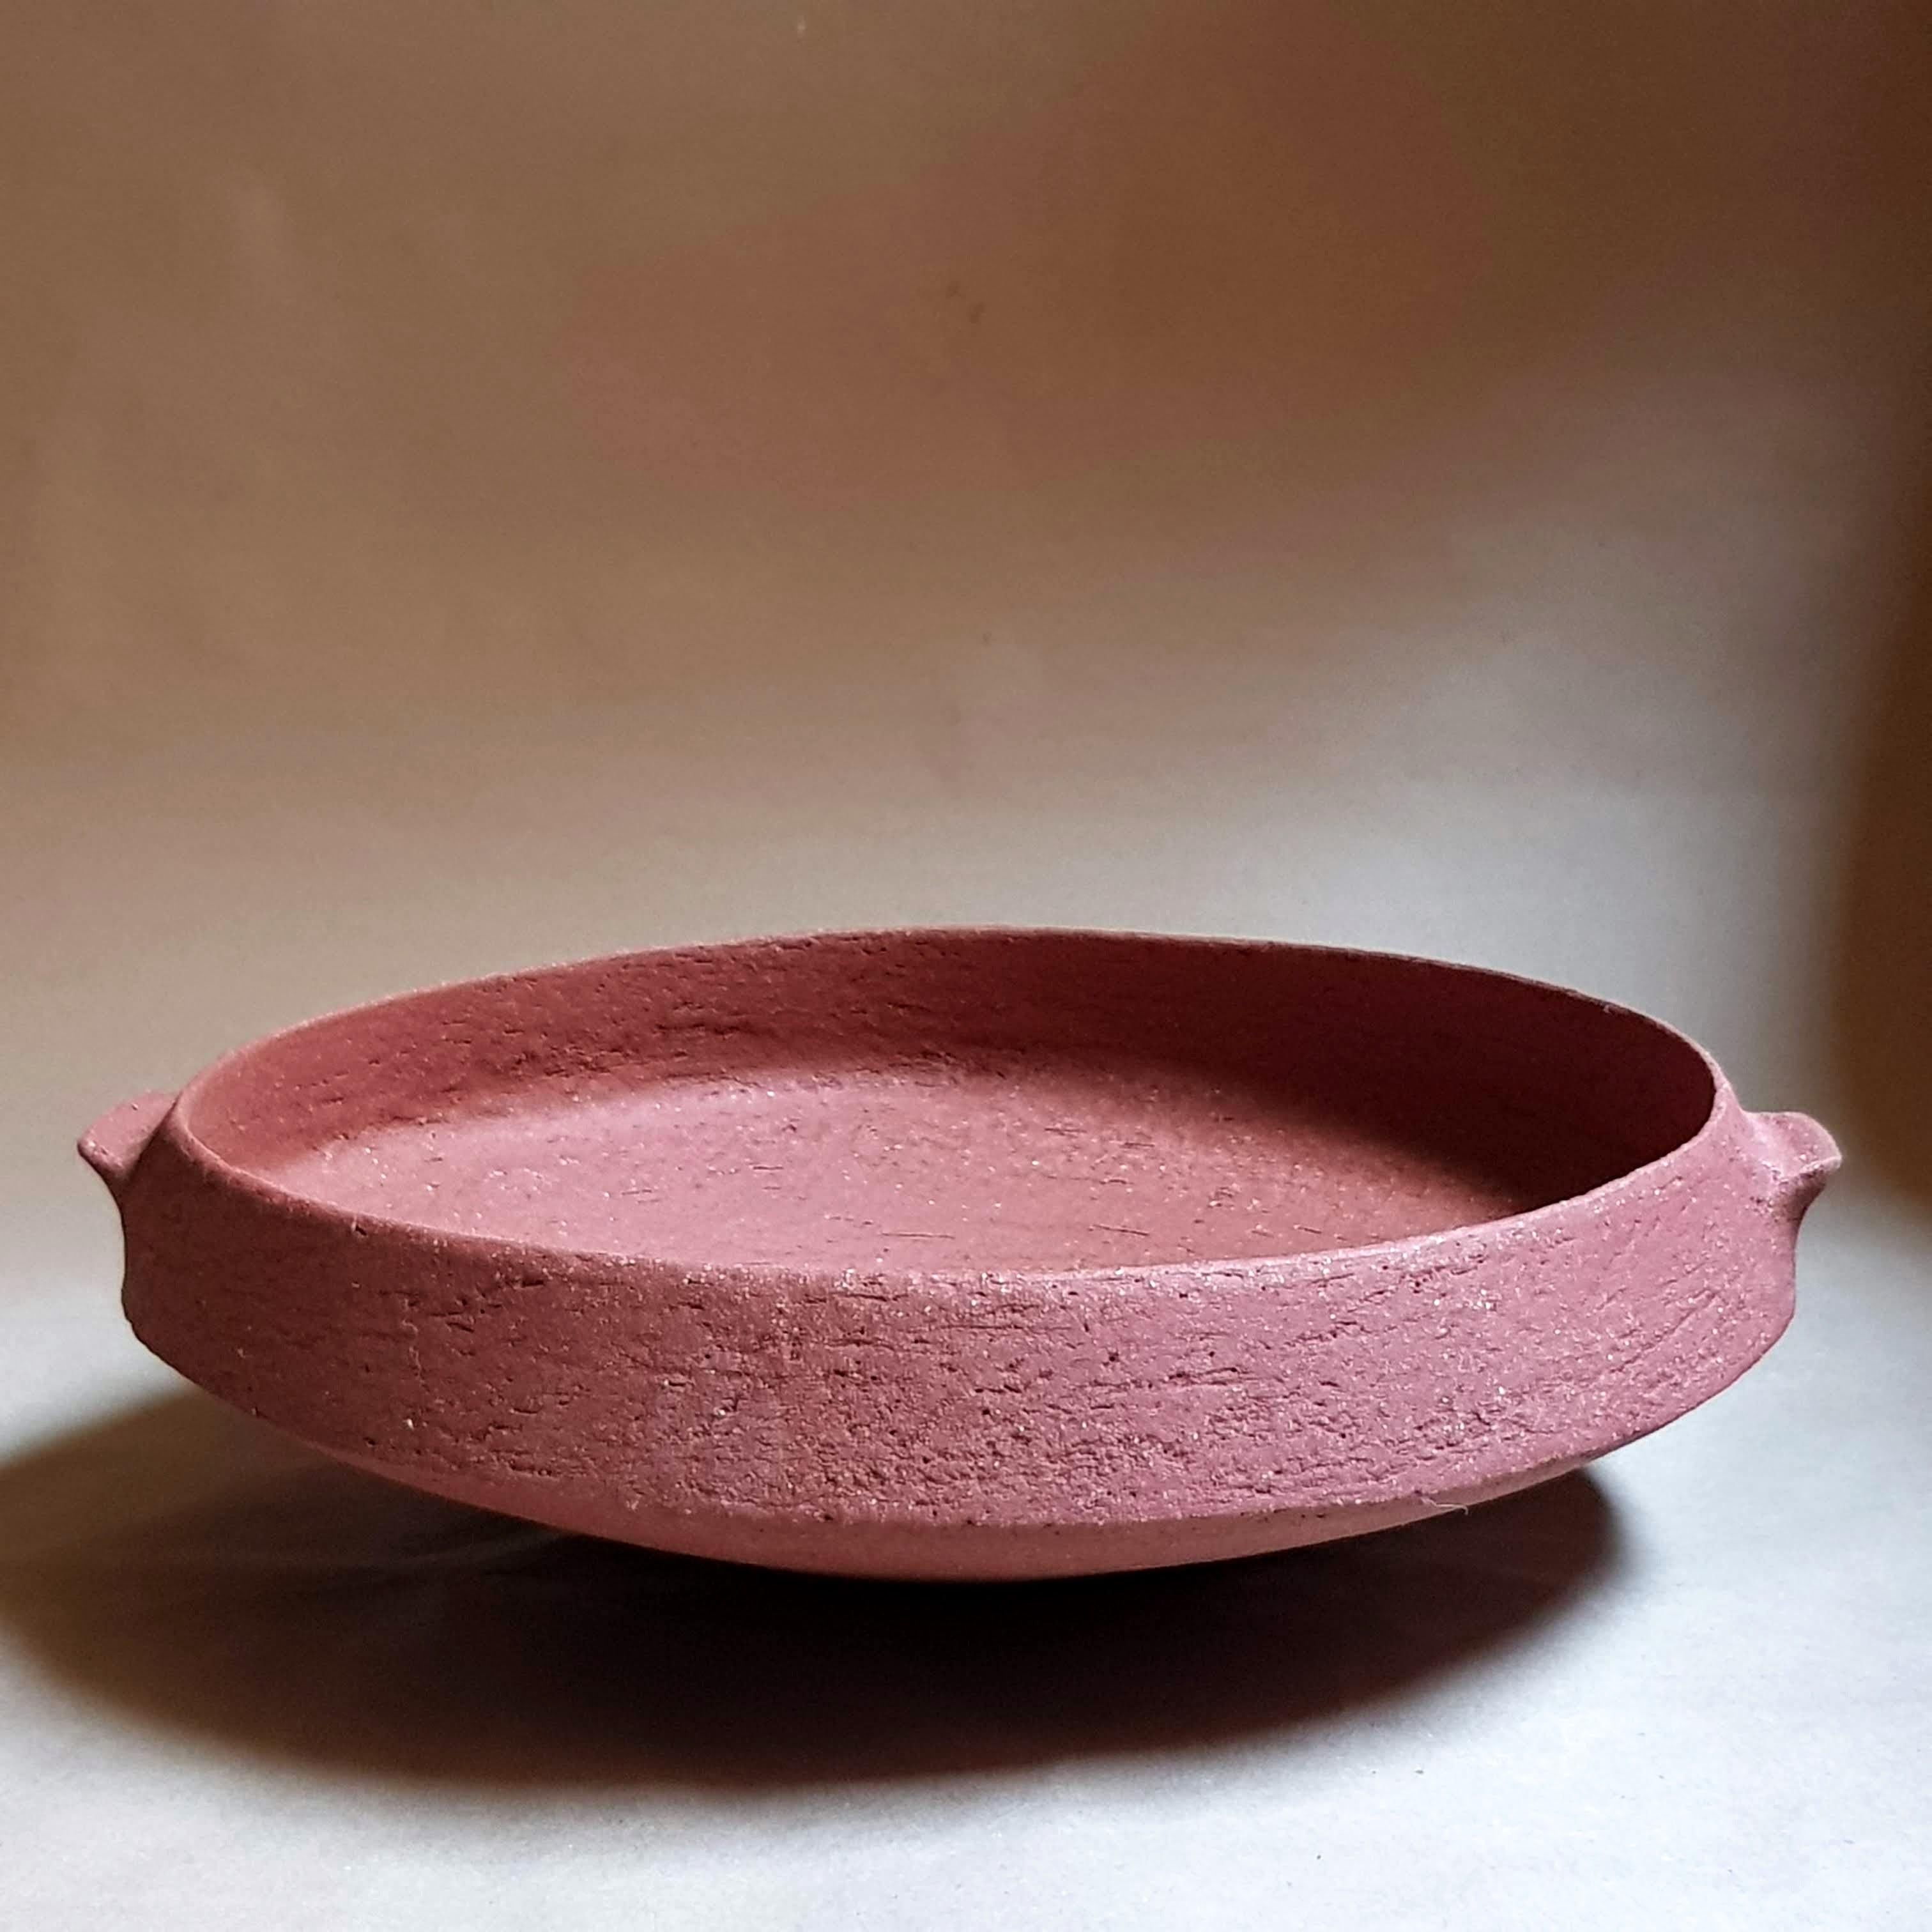 Red Stoneware Pinakio Plate with Handles by Elena Vasilantonaki
Unique
Dimensions: ⌀ 34 x H 10 cm (Dimensions may vary)
Materials: Stoneware
Available finishes: With\without handles - Black, White, Grey , Brown, Red, White Patina

Growing up in